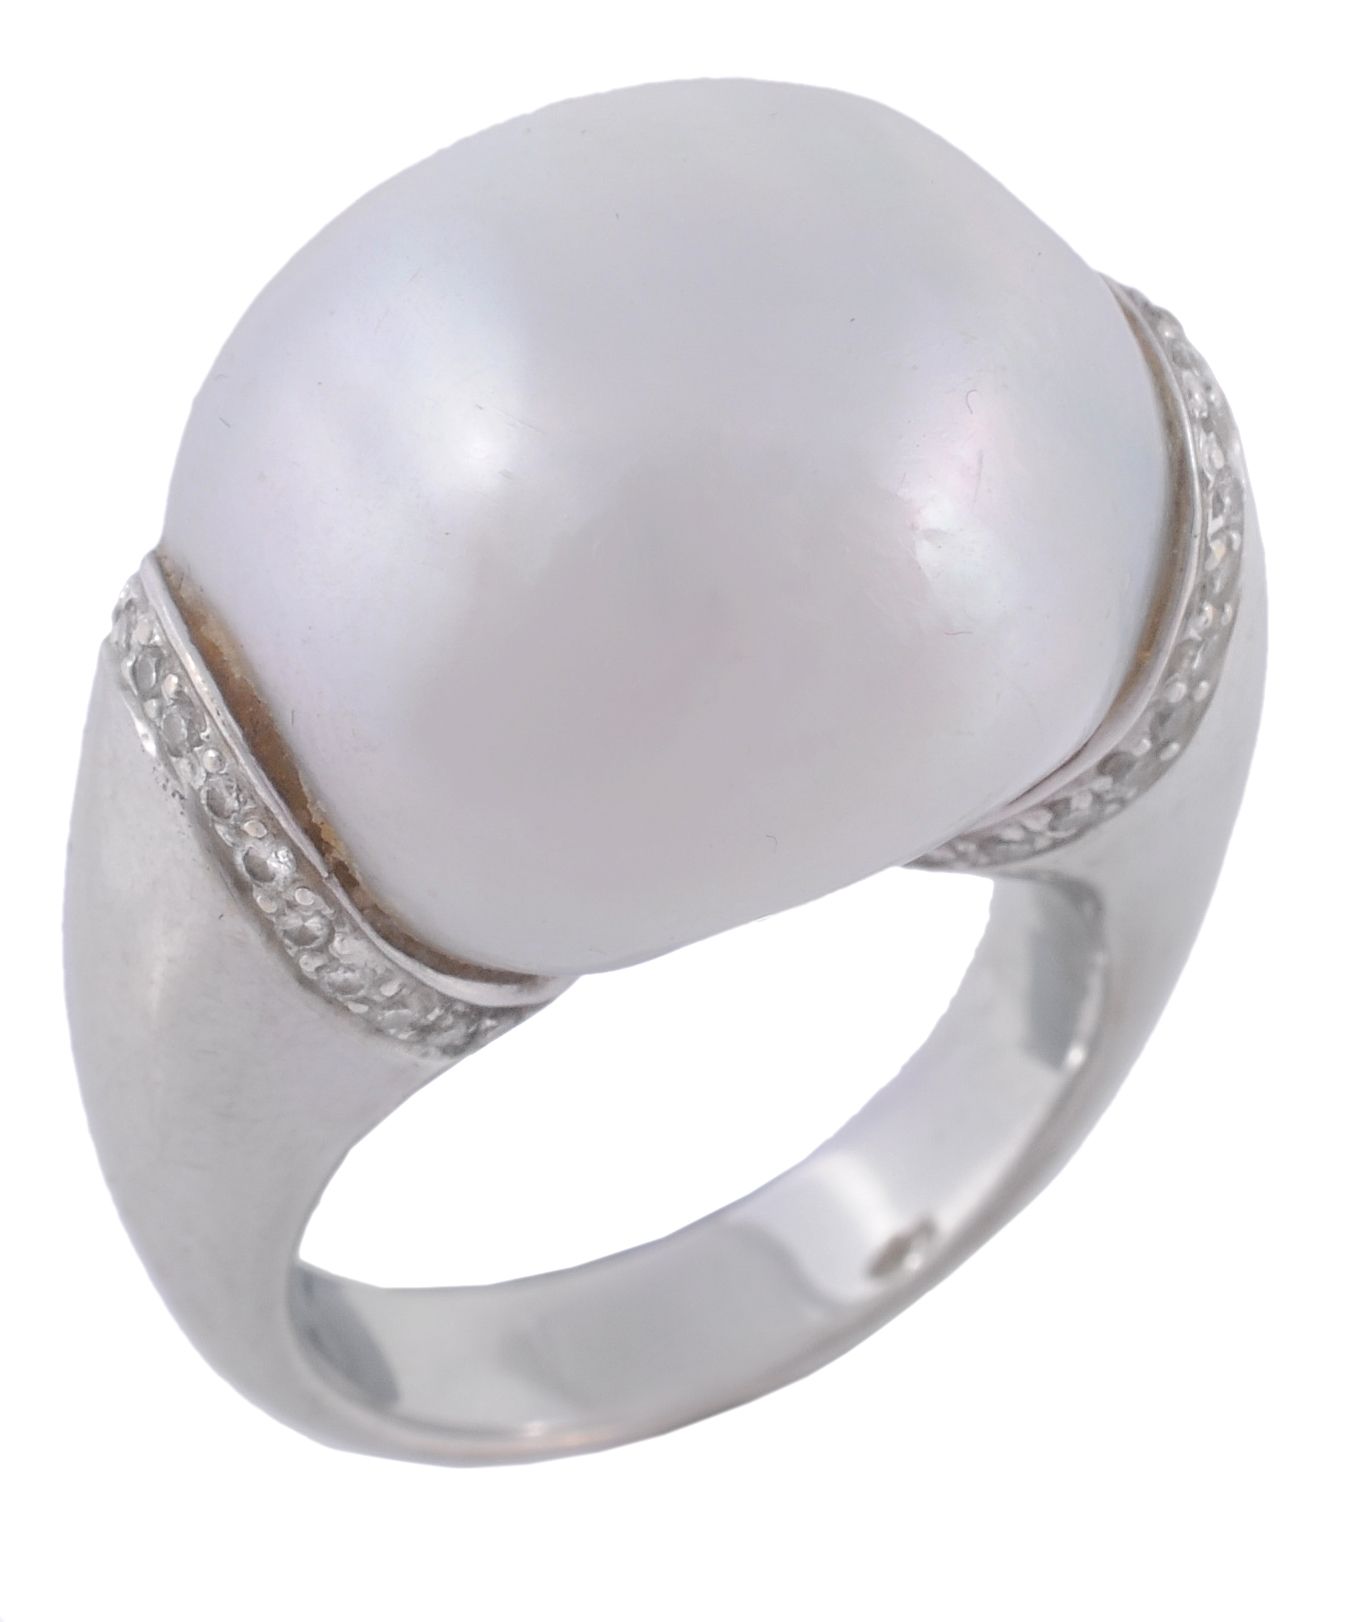 A baroque South Sea cultured pearl ring, the baroque shaped South Sea...  A baroque South Sea